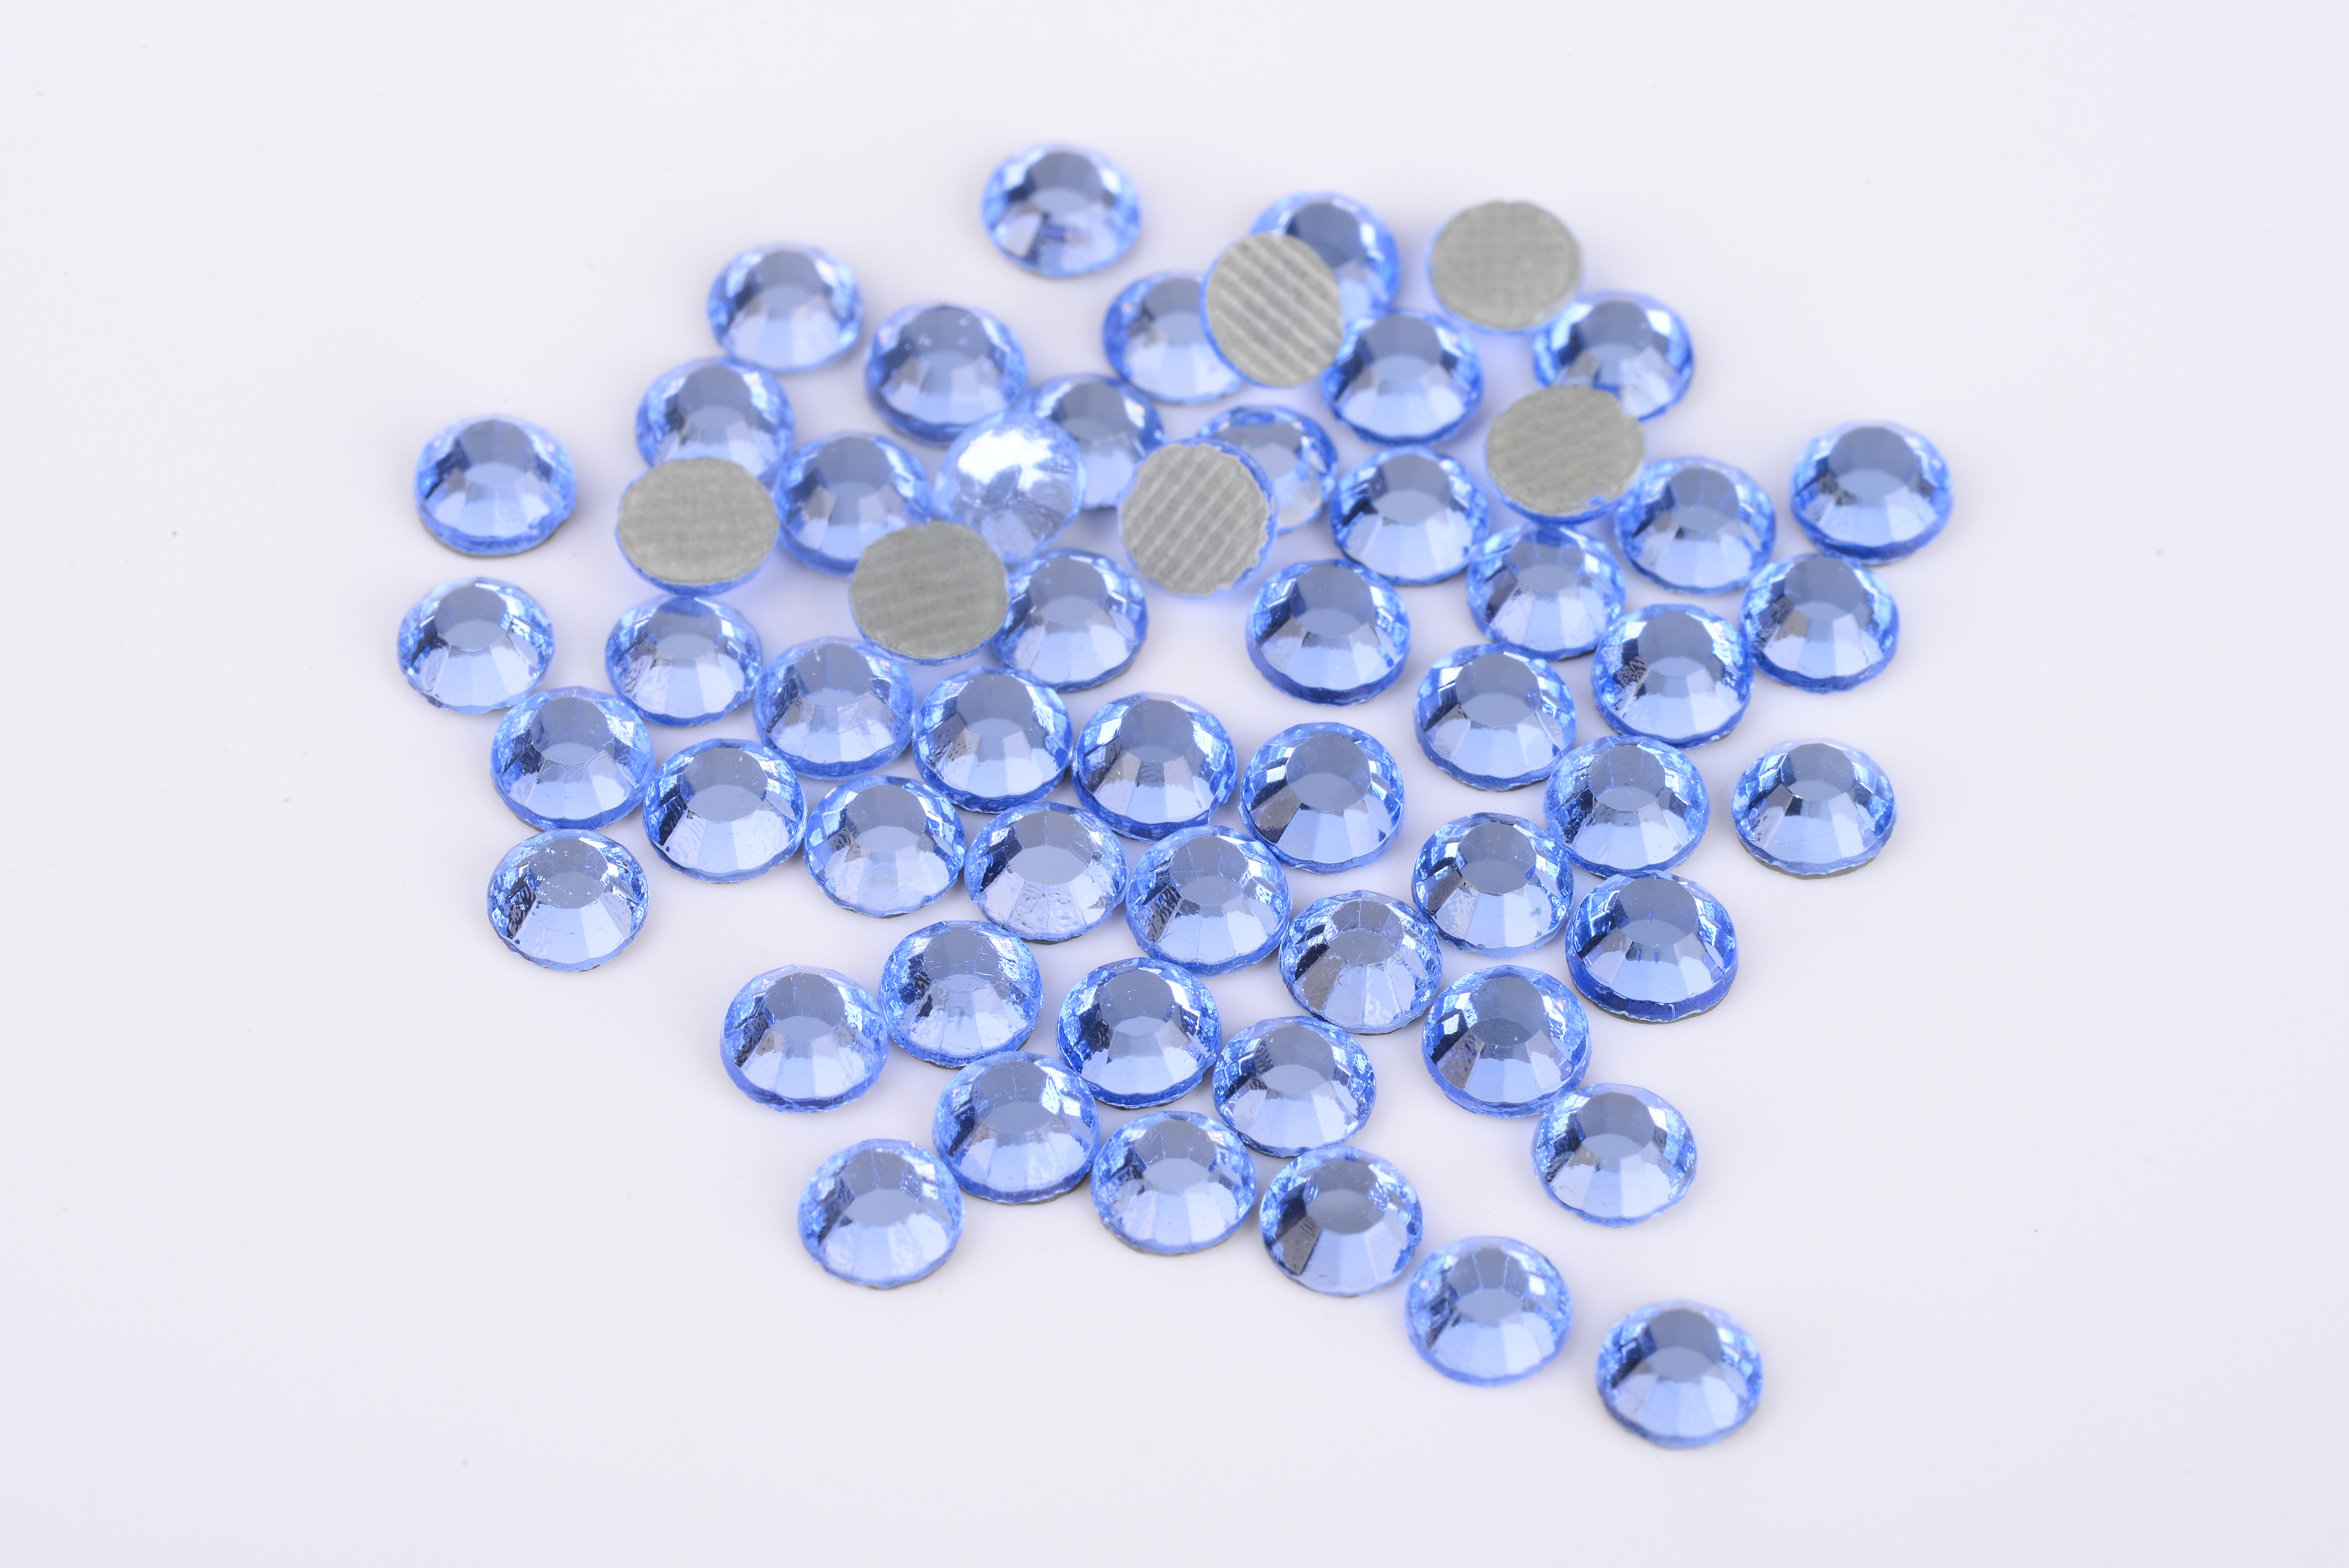 Nail Art Loose Hotfix Rhinestones Glass Material Good Stickness With Shinning Facets